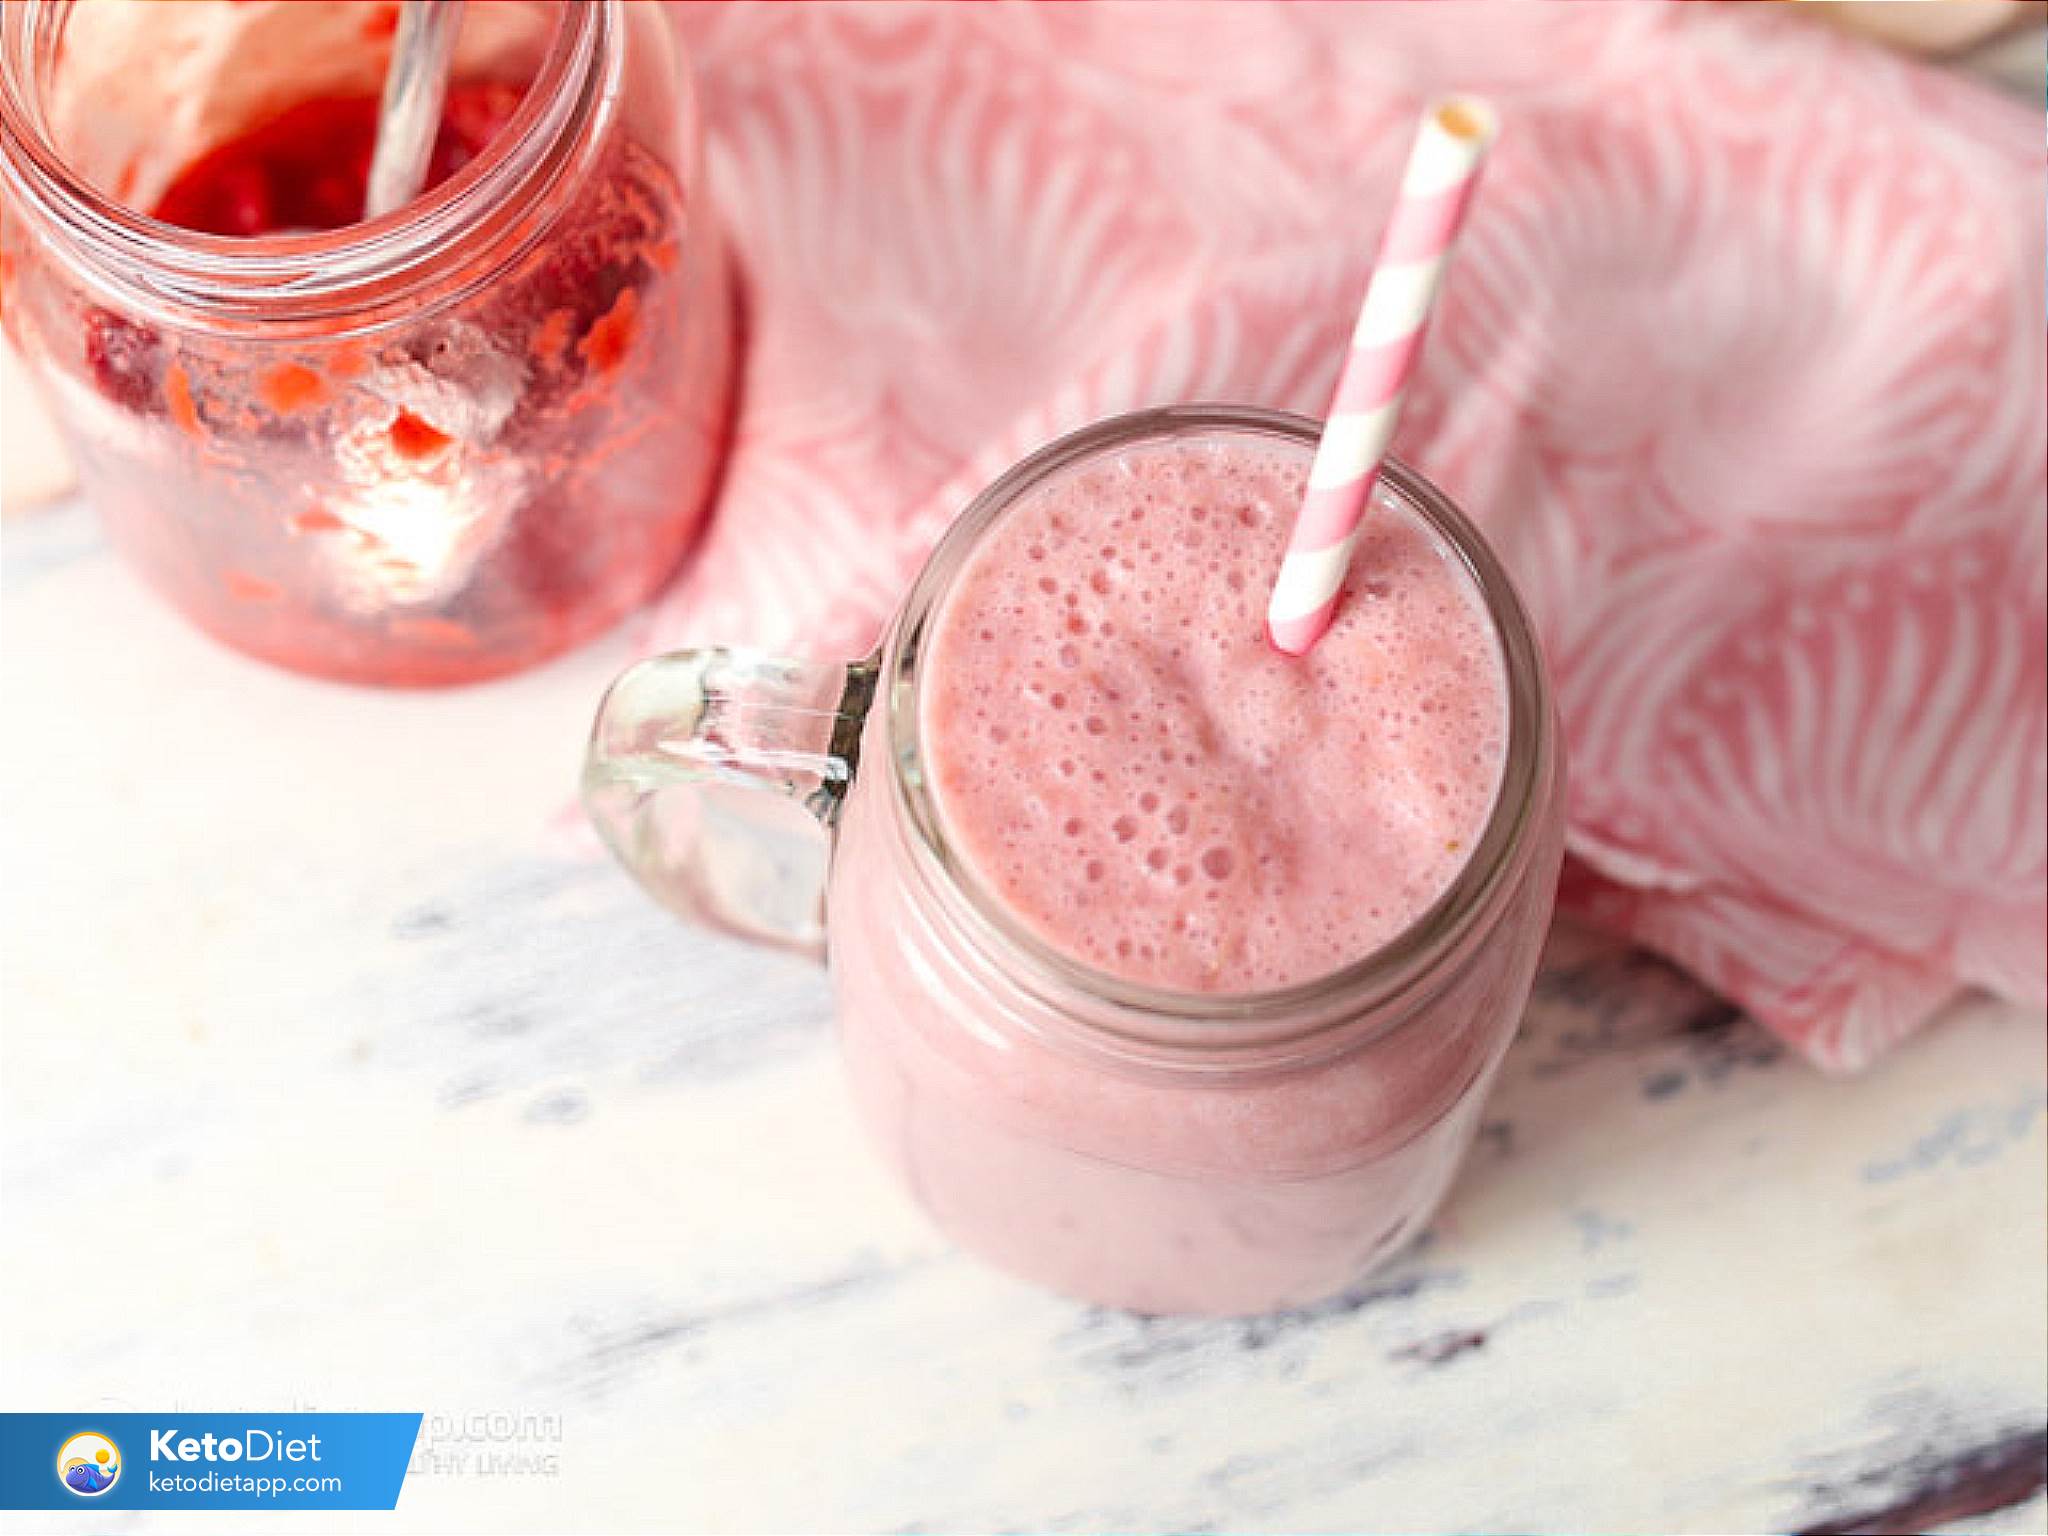 Indulge guilt-free with these delicious sugar-free smoothies!